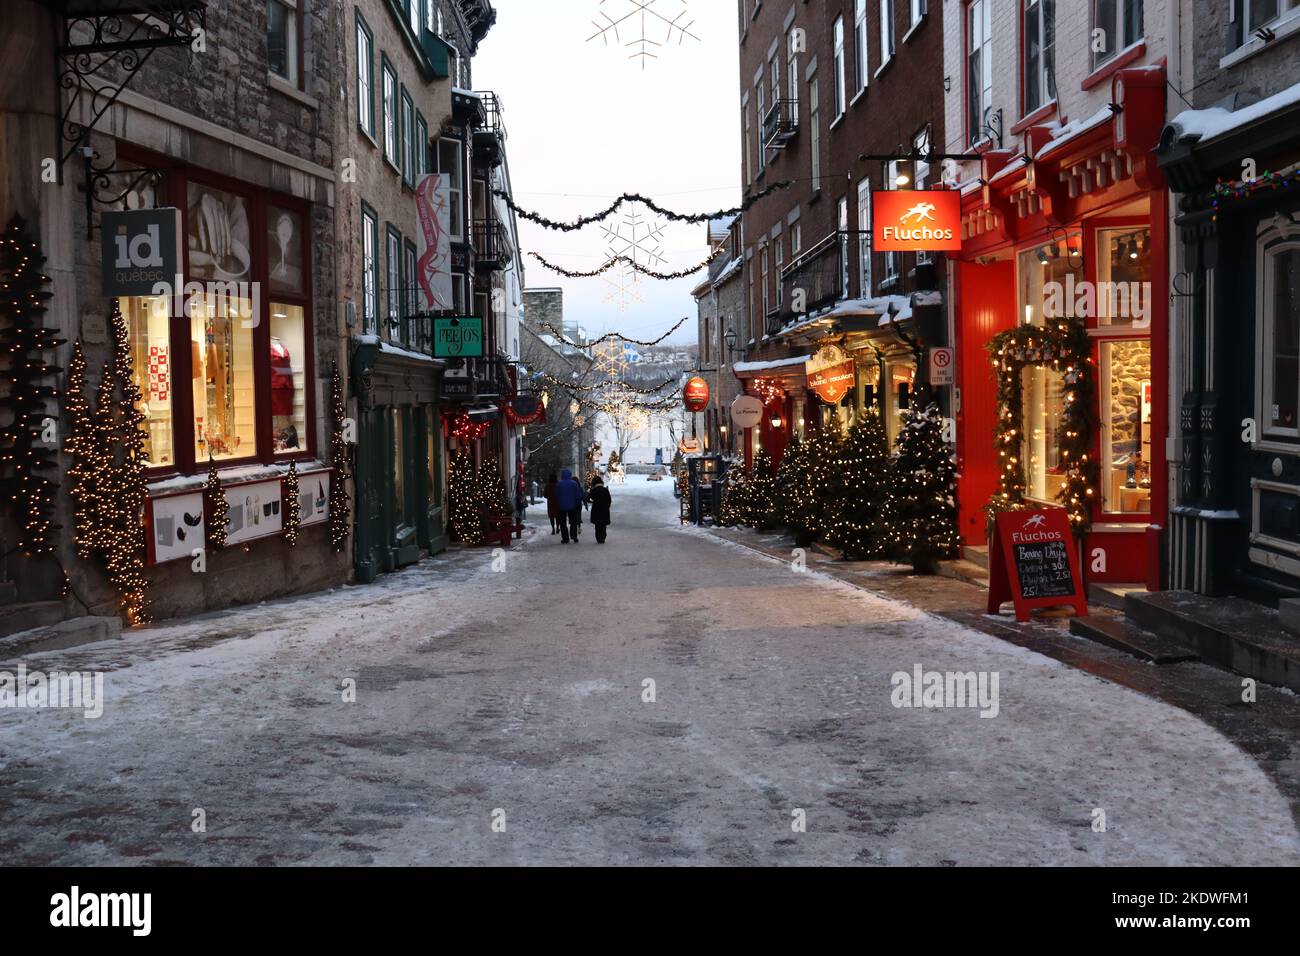 Christmas decorated alley in Old Quebec, Photo Stock Stock Photo